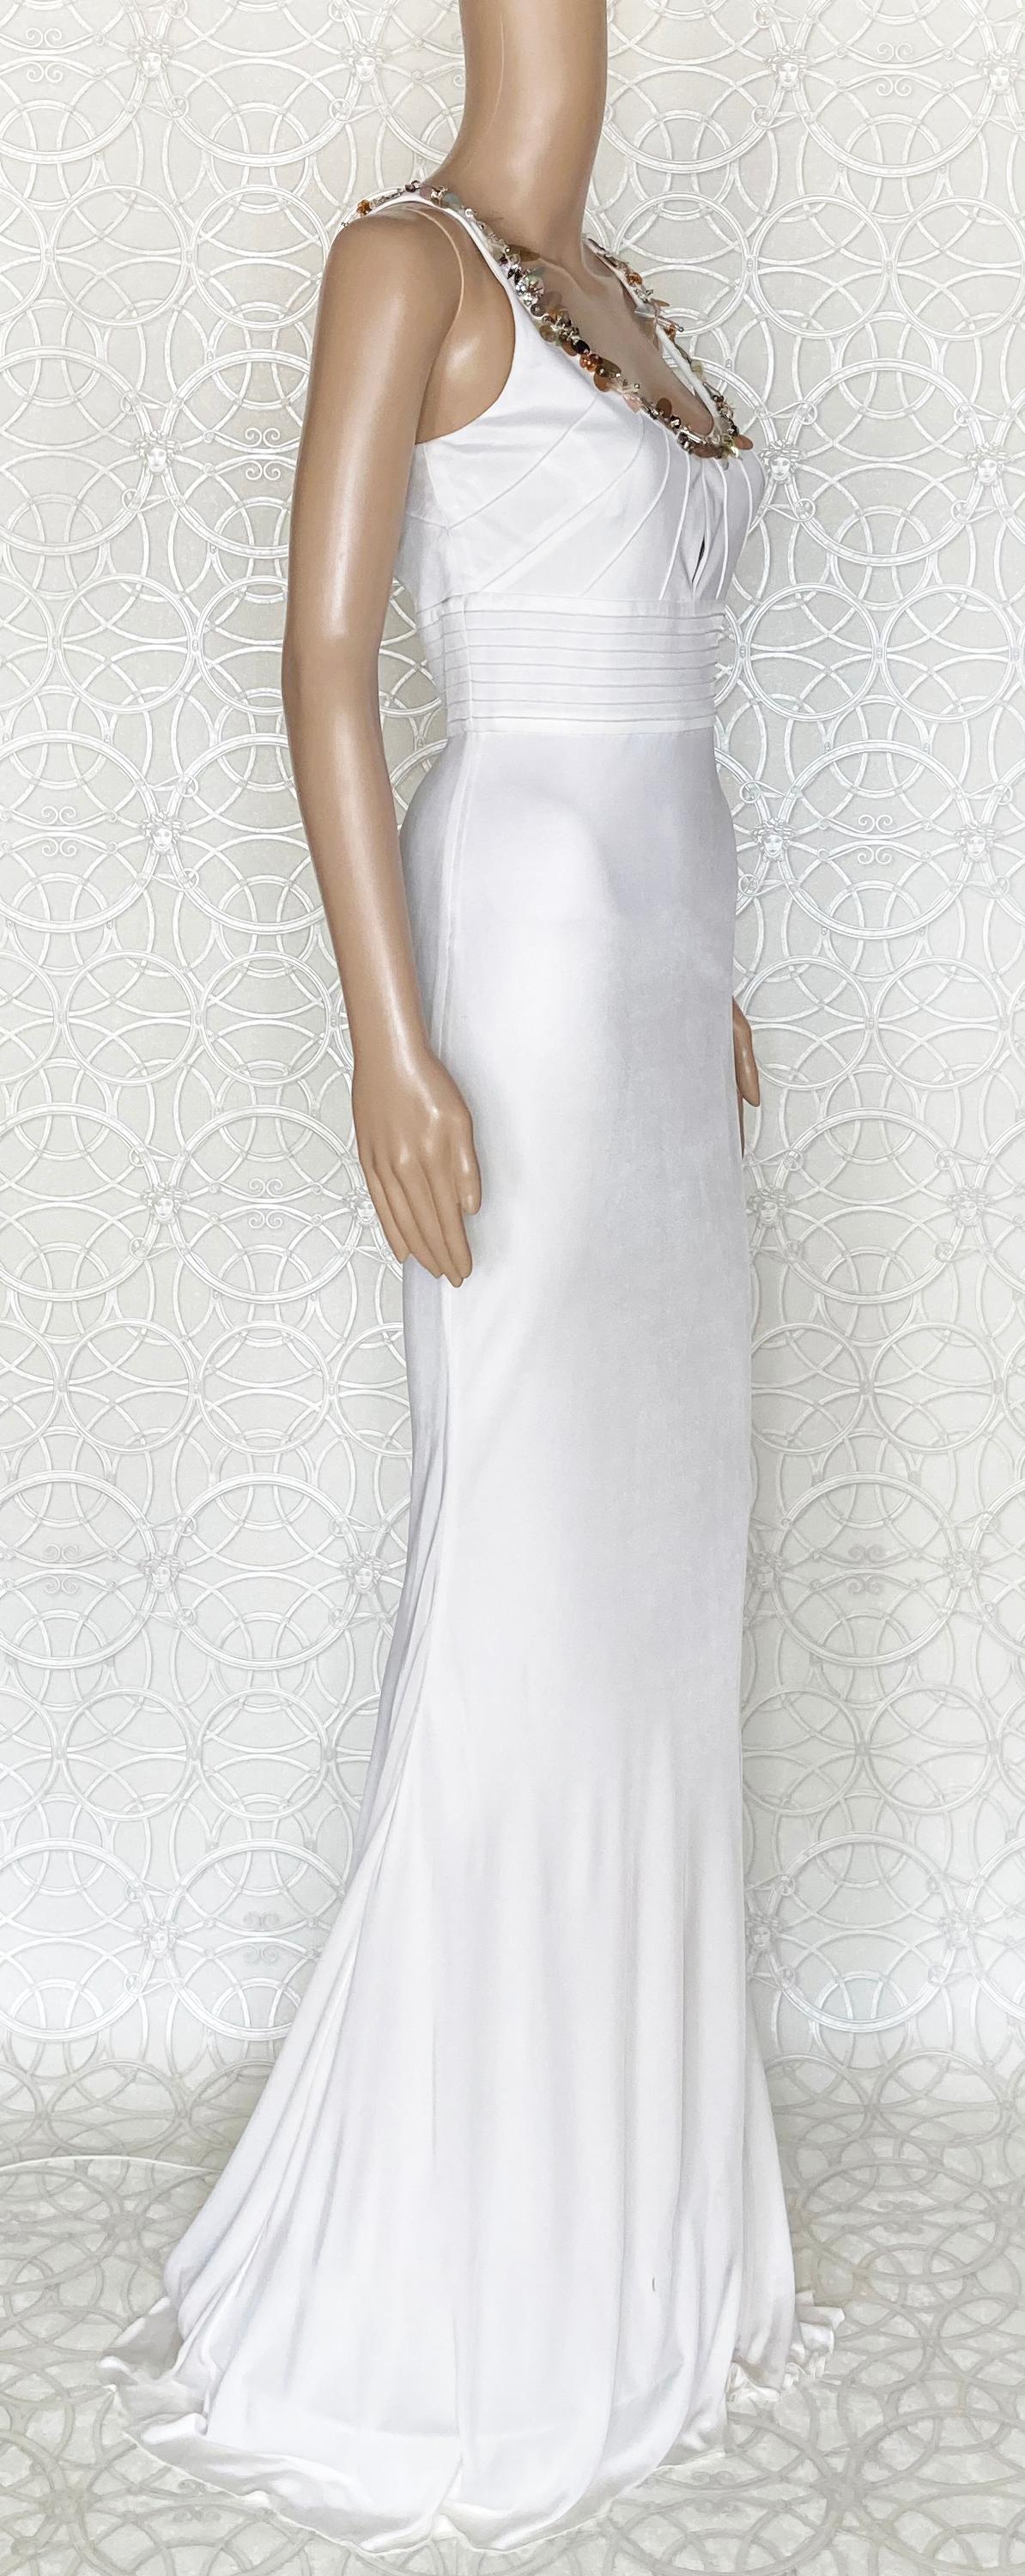 NEW VERSACE CRYSTAL EMBELLISHED WHITE LONG DRESS Gown  42 - 6 For Sale 7